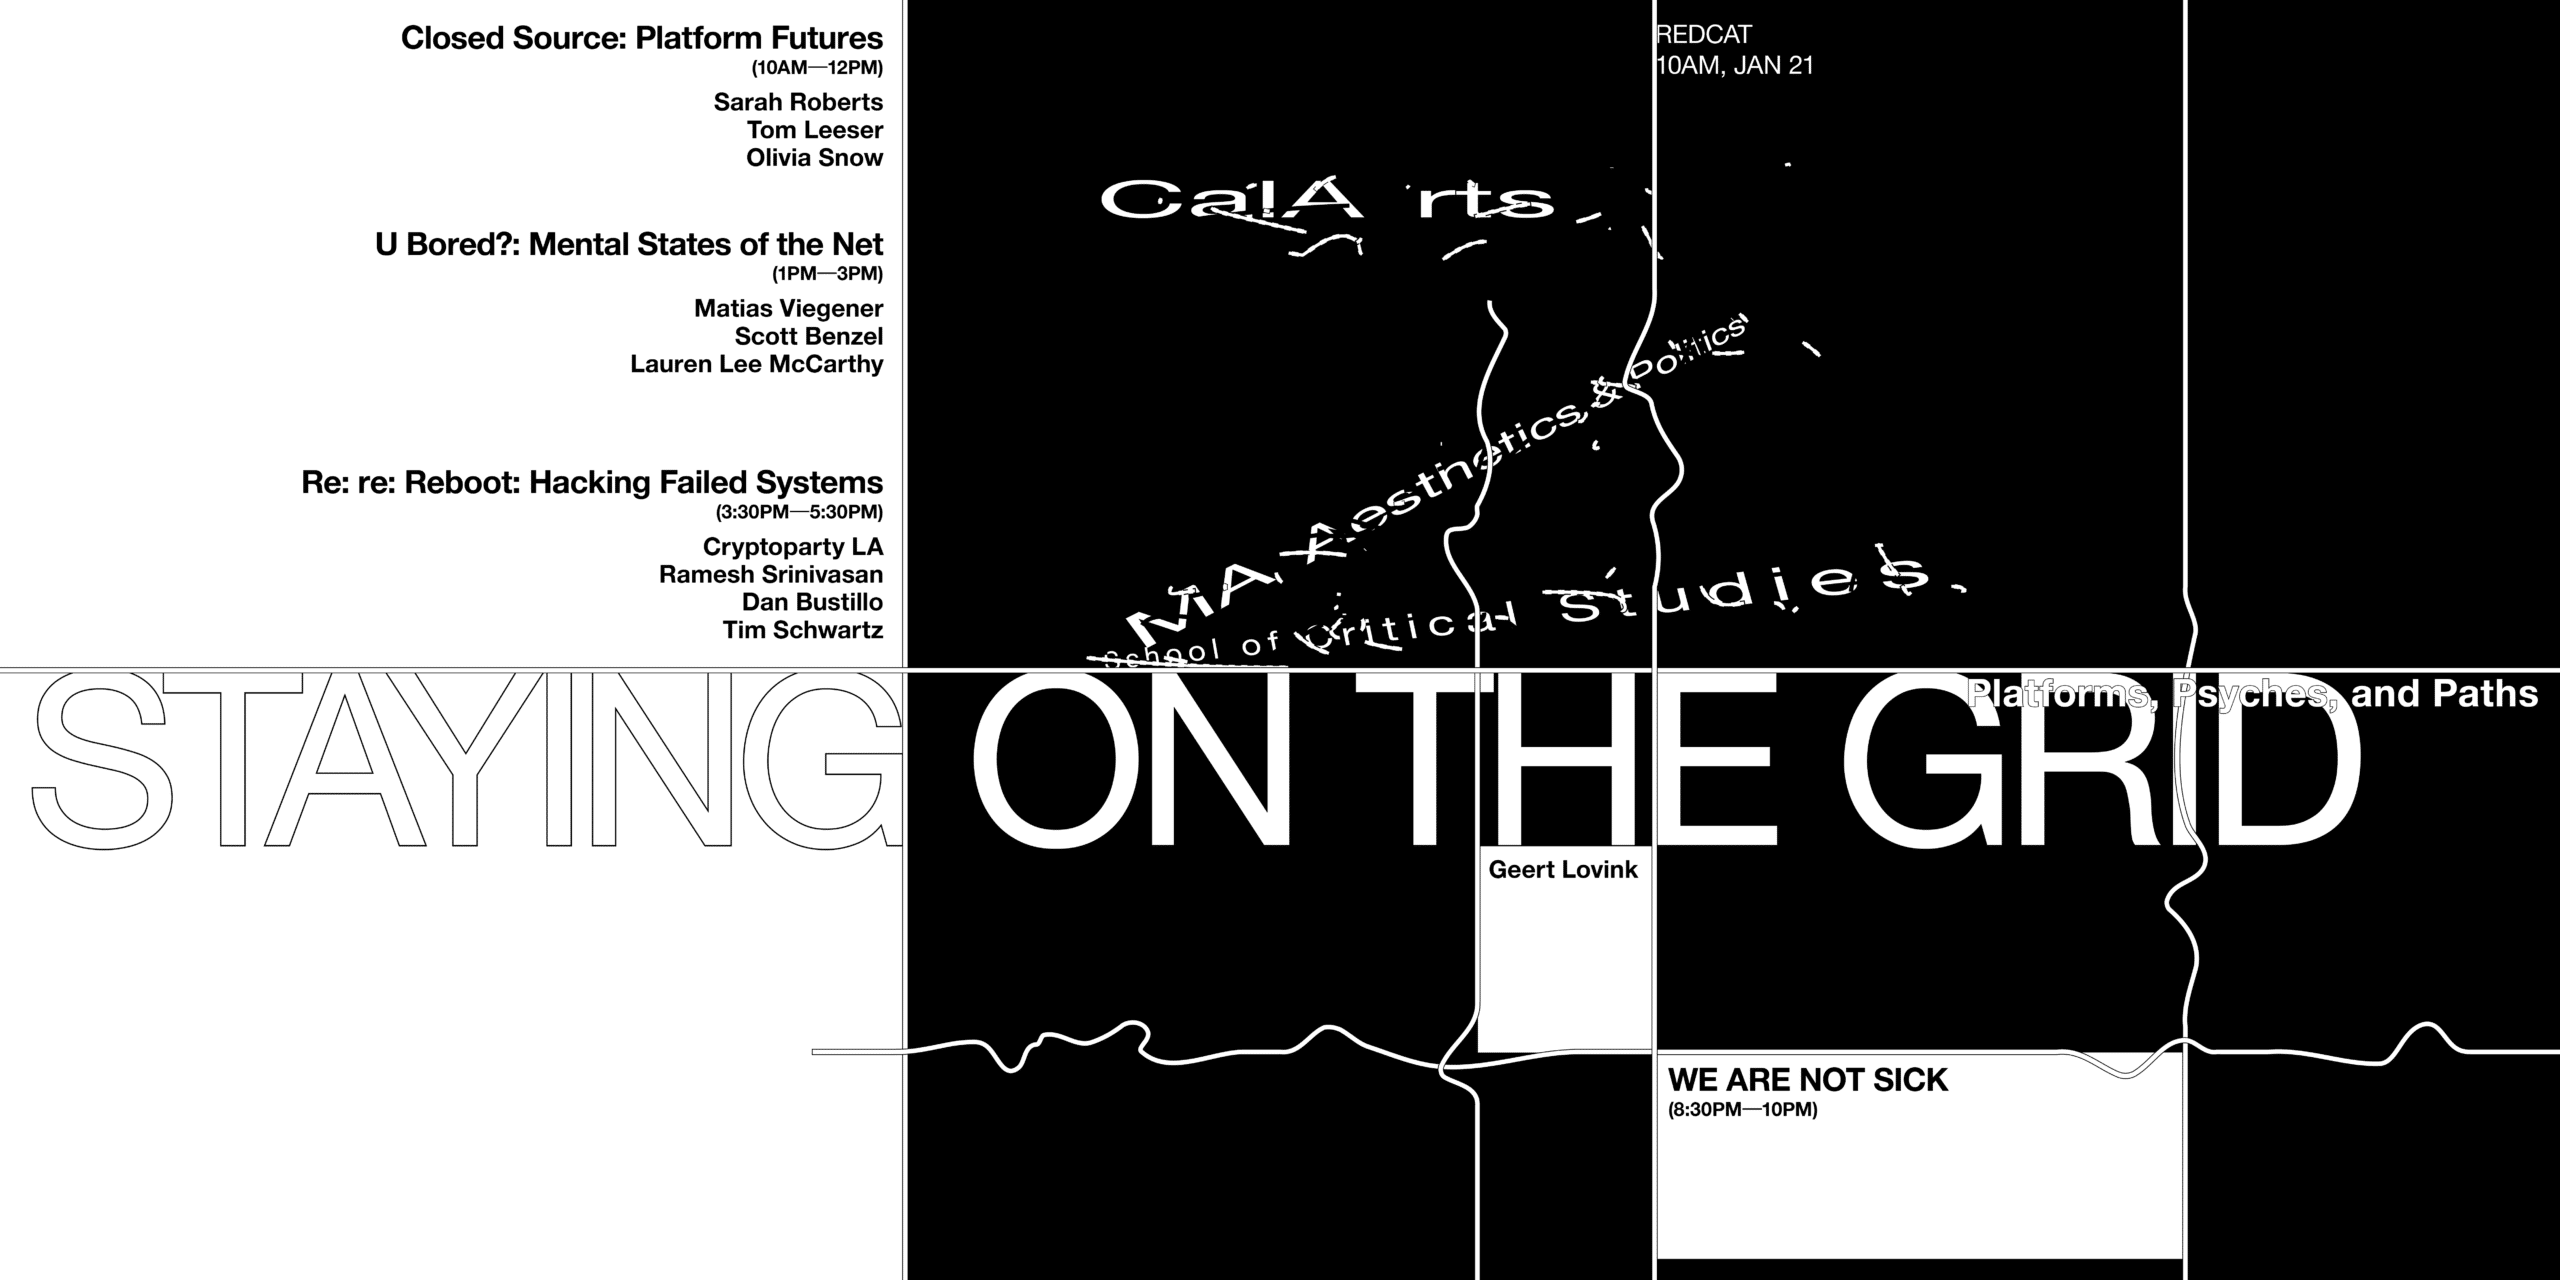 Black and white graphic poster for Staying on the Grid